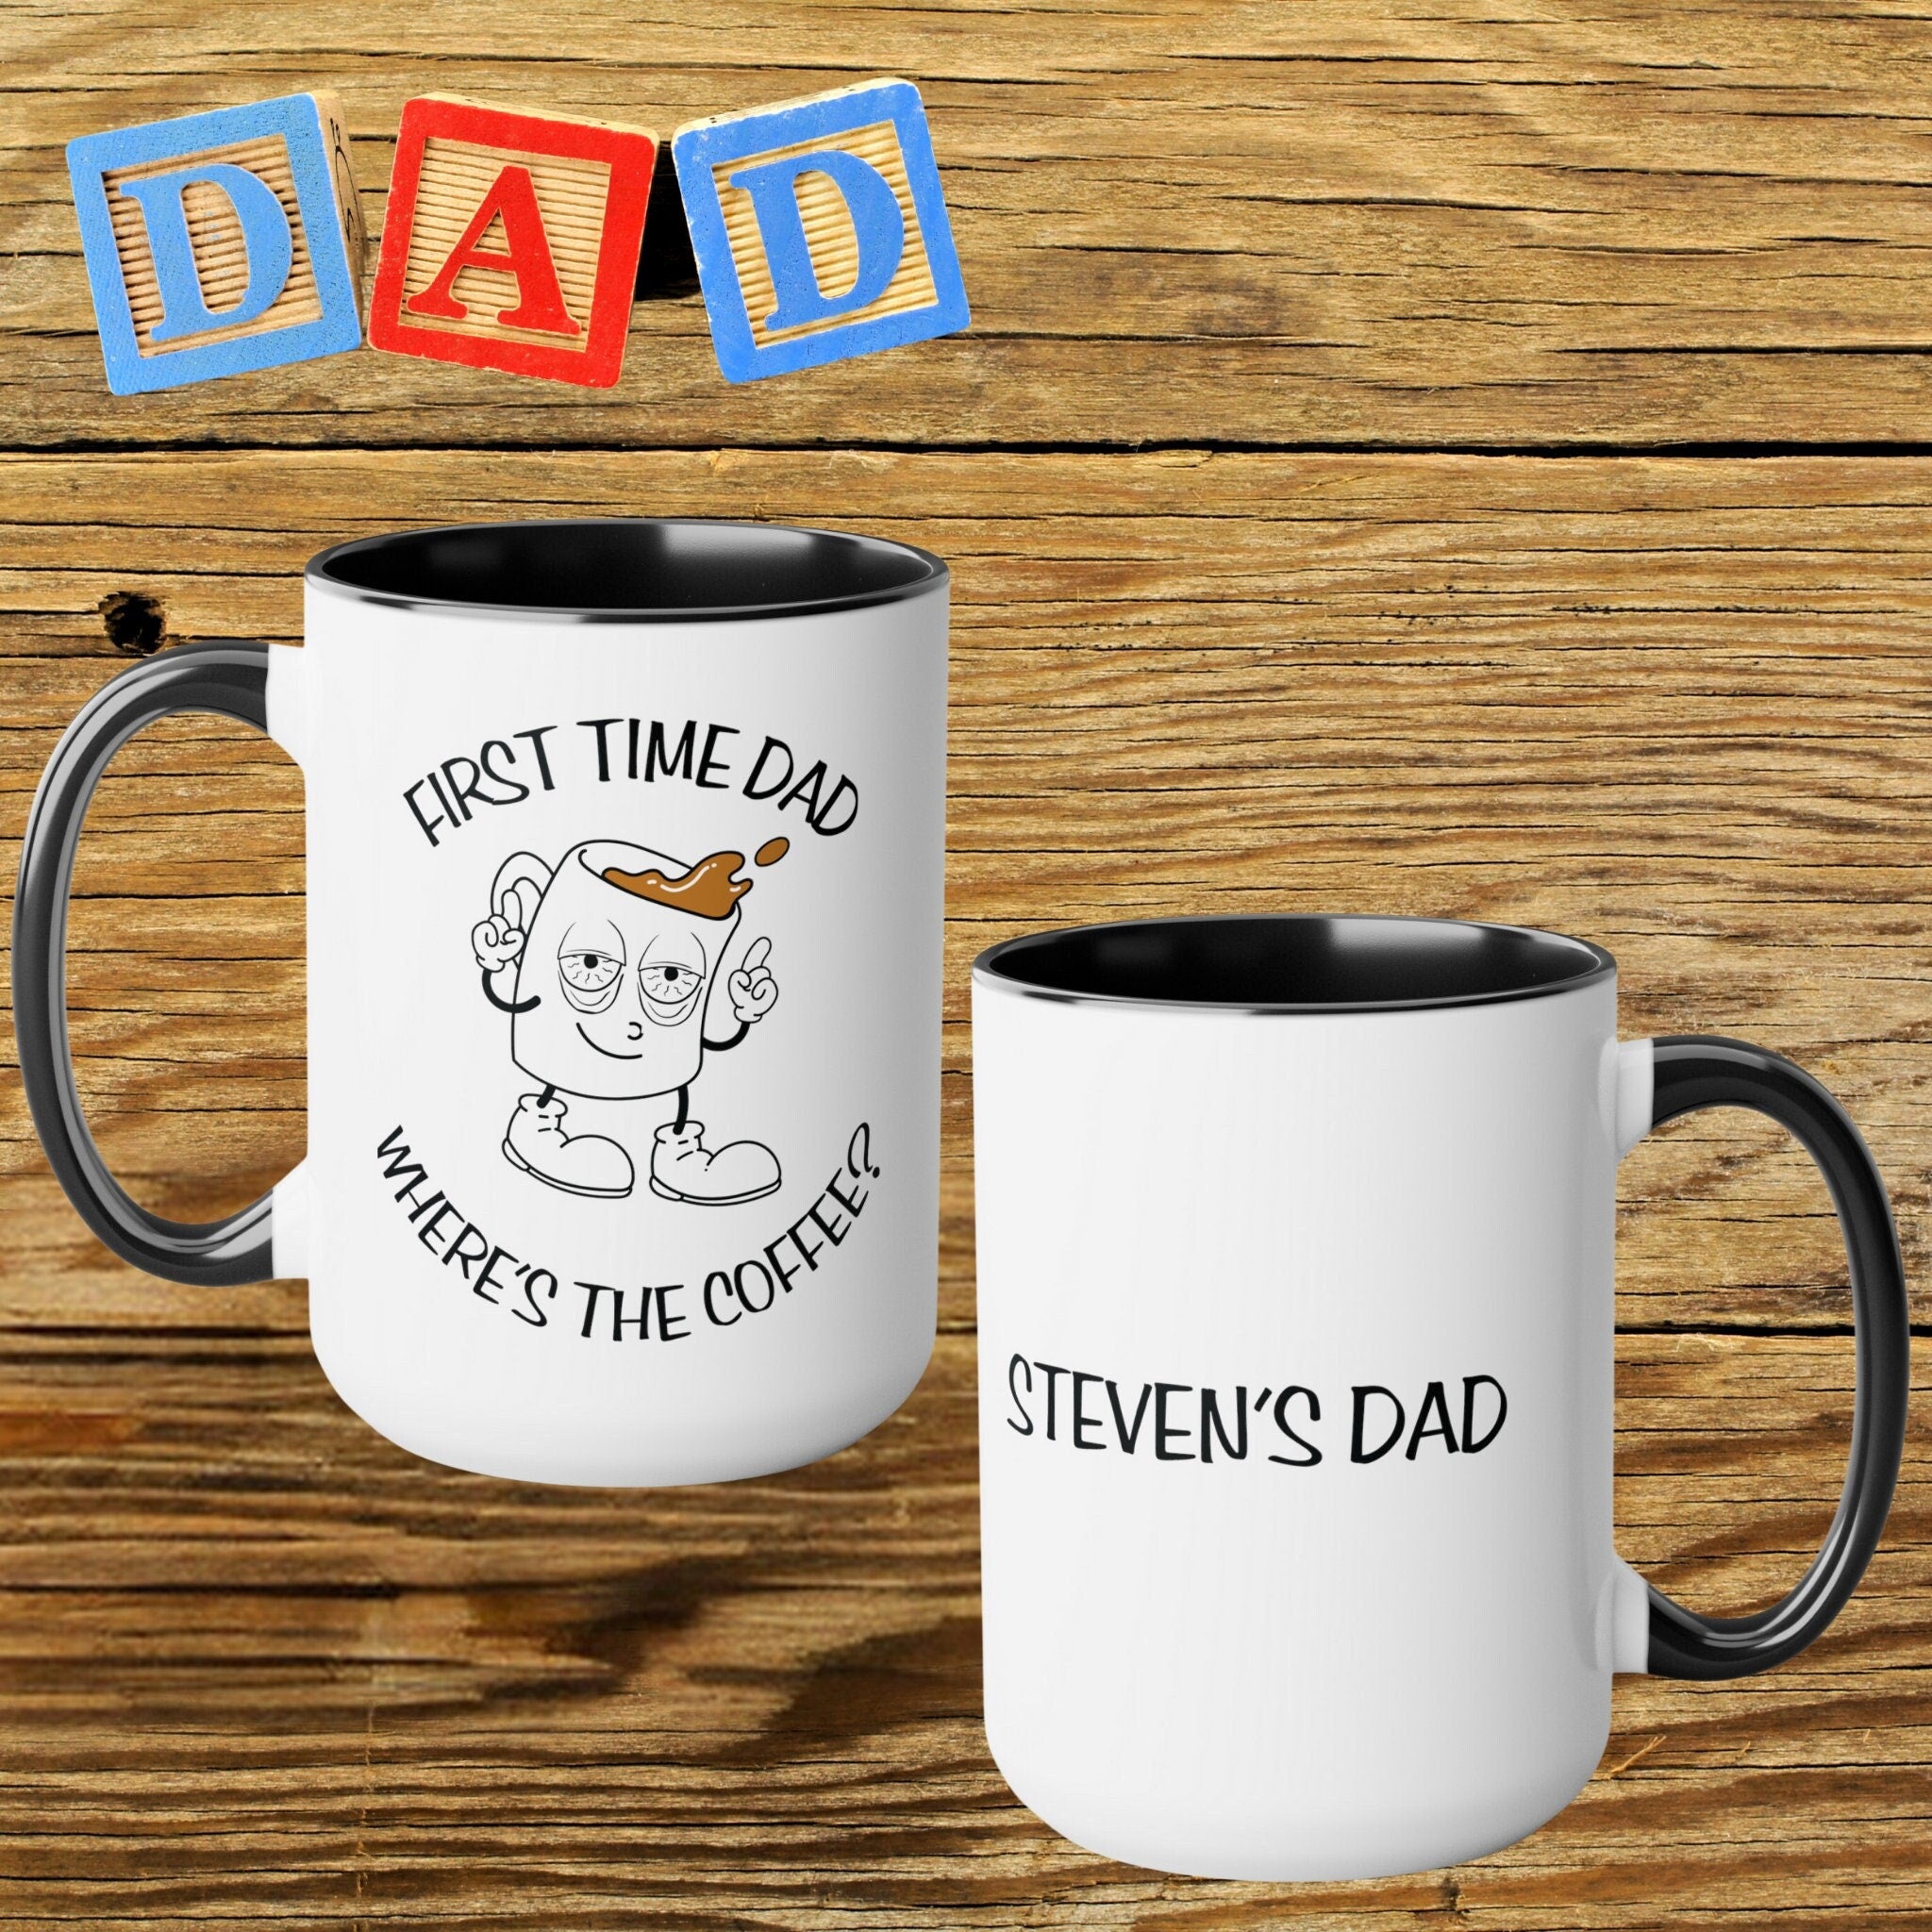 Christmas Gifts For Dad: 15+ Best Gift Ideas that He'll Cherish